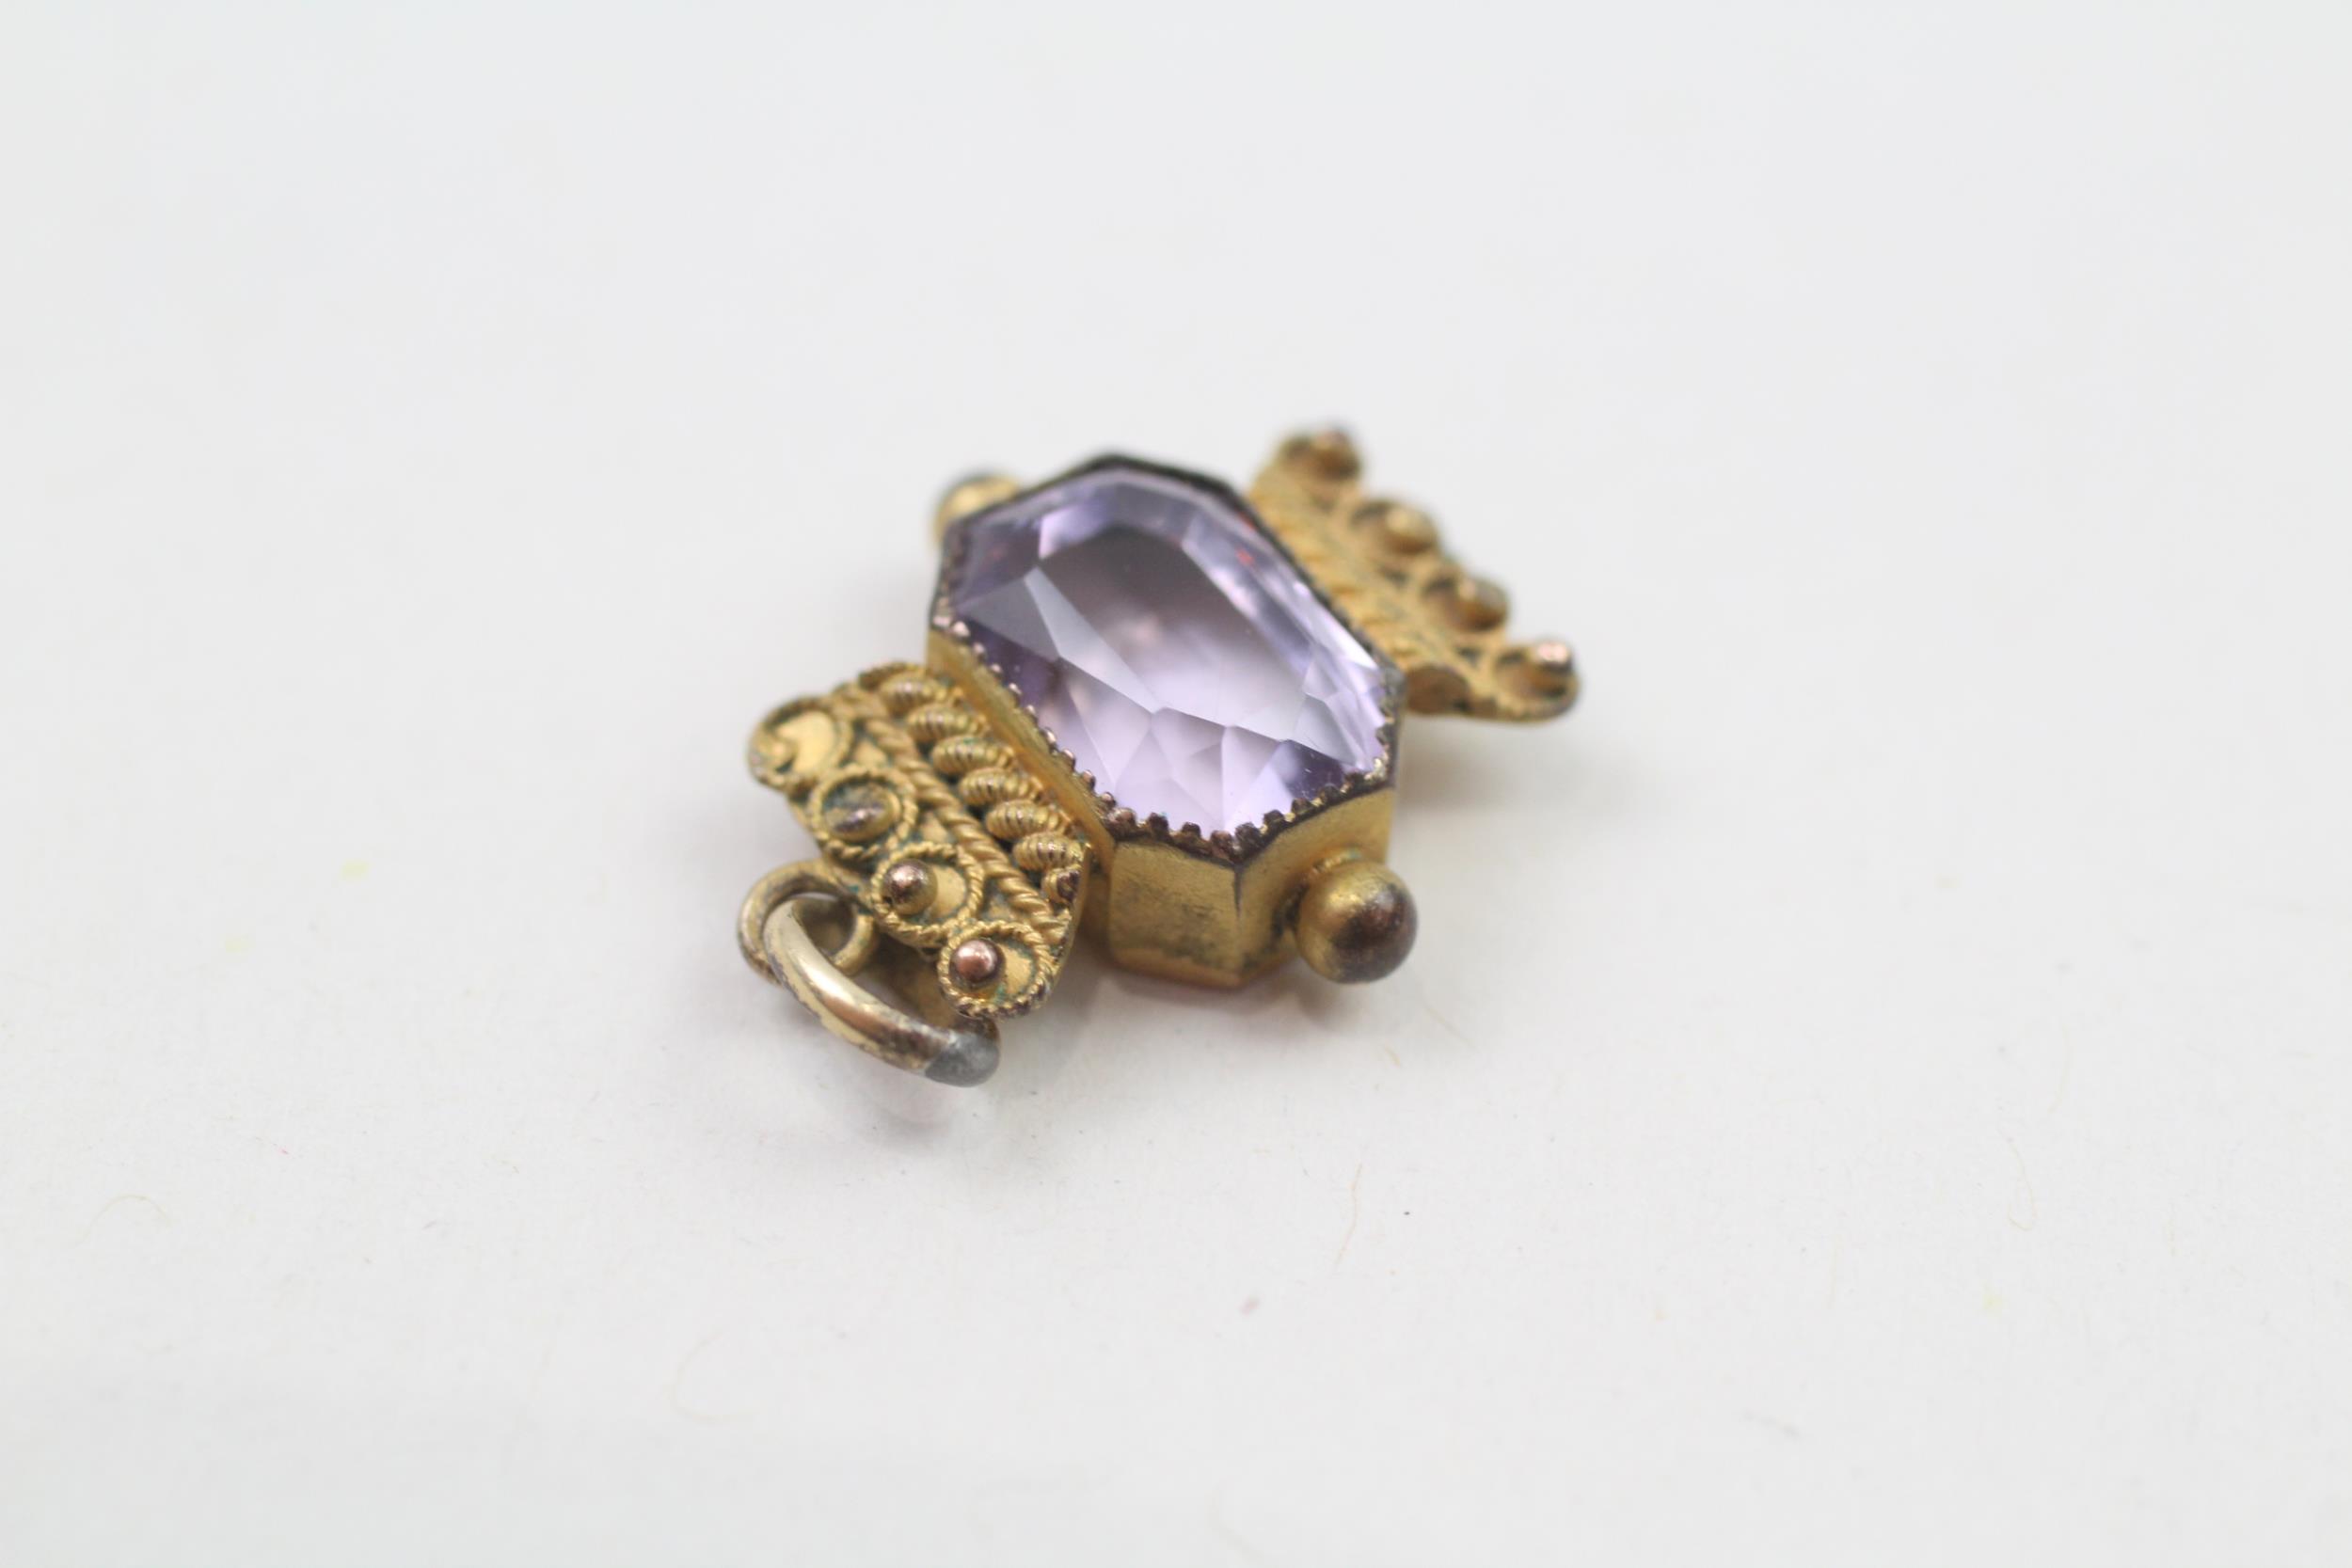 9ct gold antique amethyst charm (1.7g) - Image 3 of 4